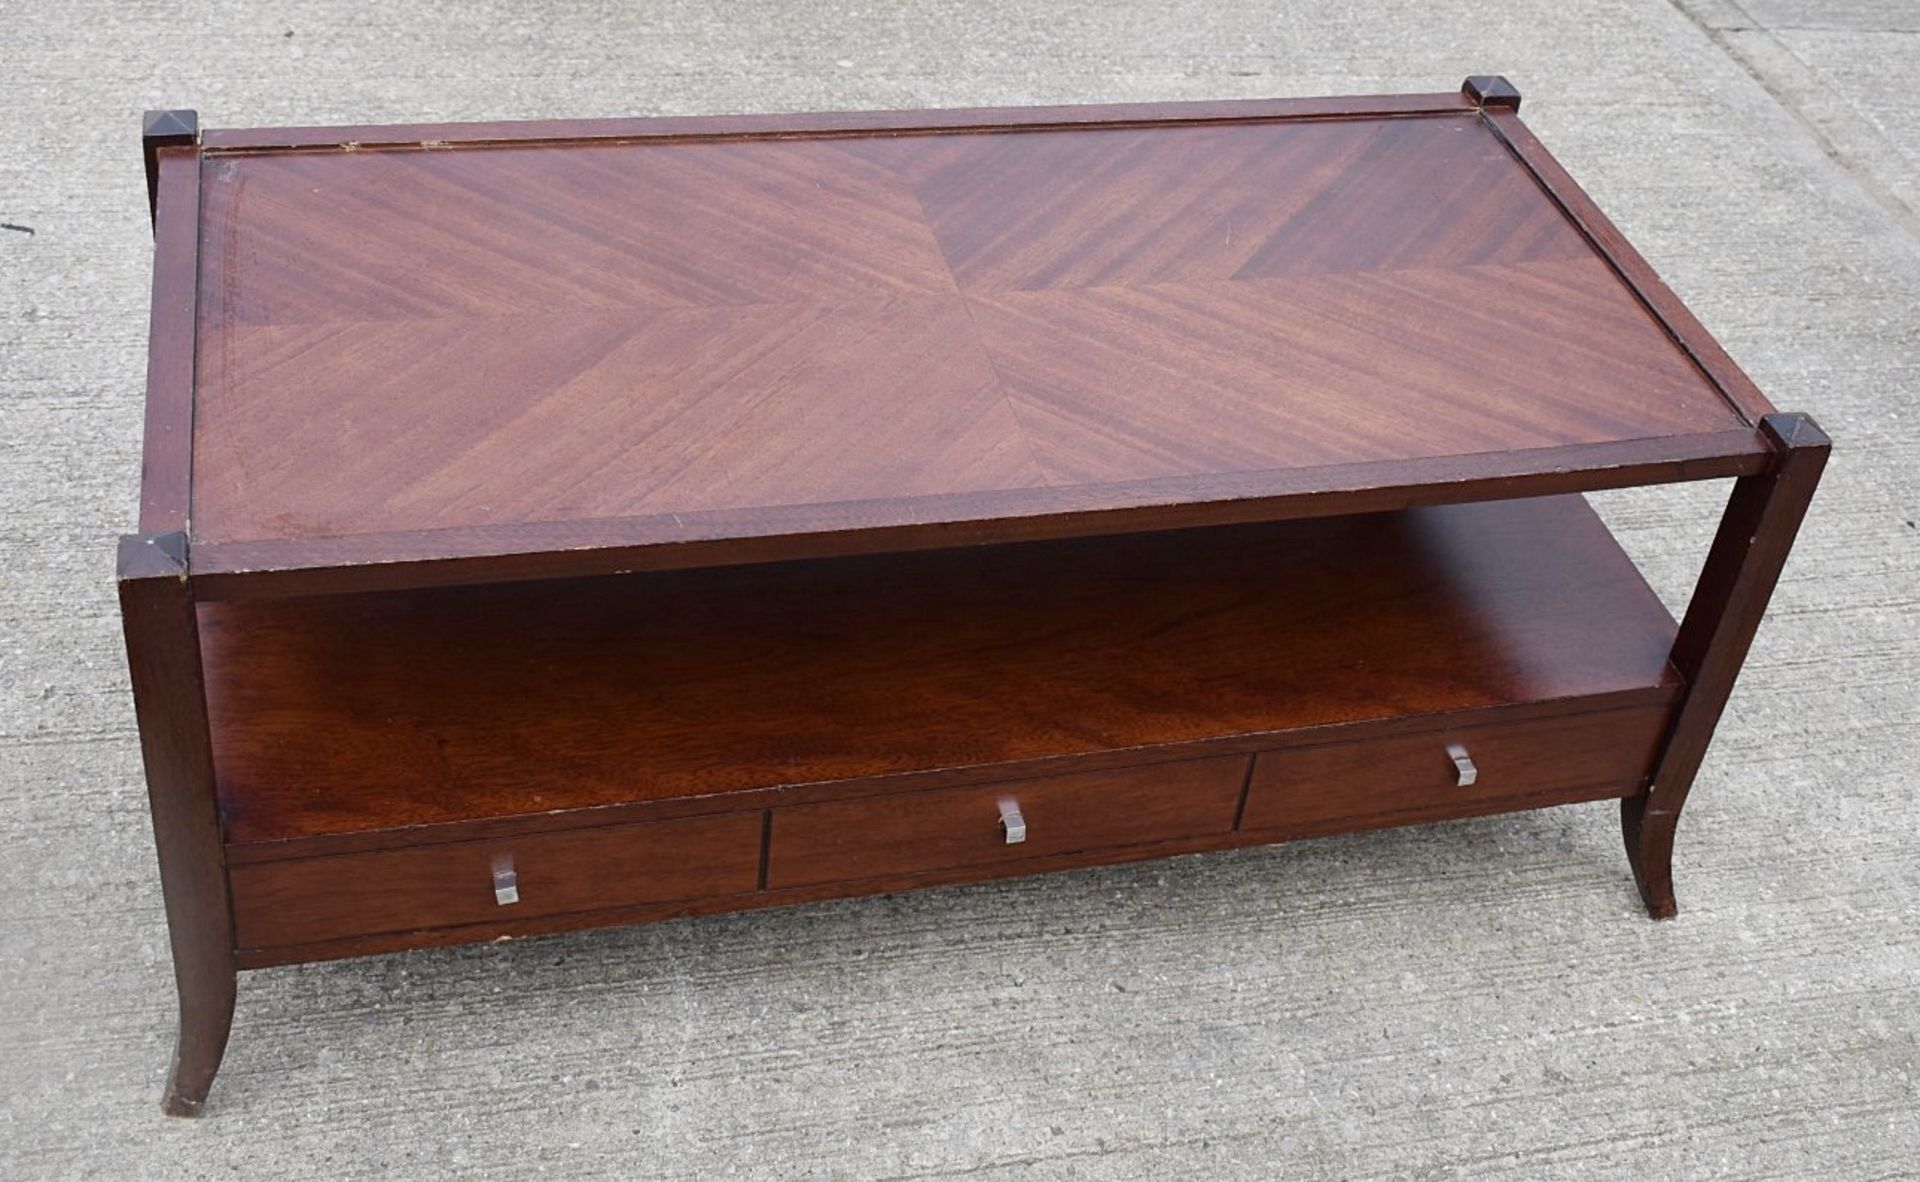 1 x Elegant Handcrafted Solid Wood Coffee / Cocktail Table with False Drawer Frontage - Recently - Image 2 of 3